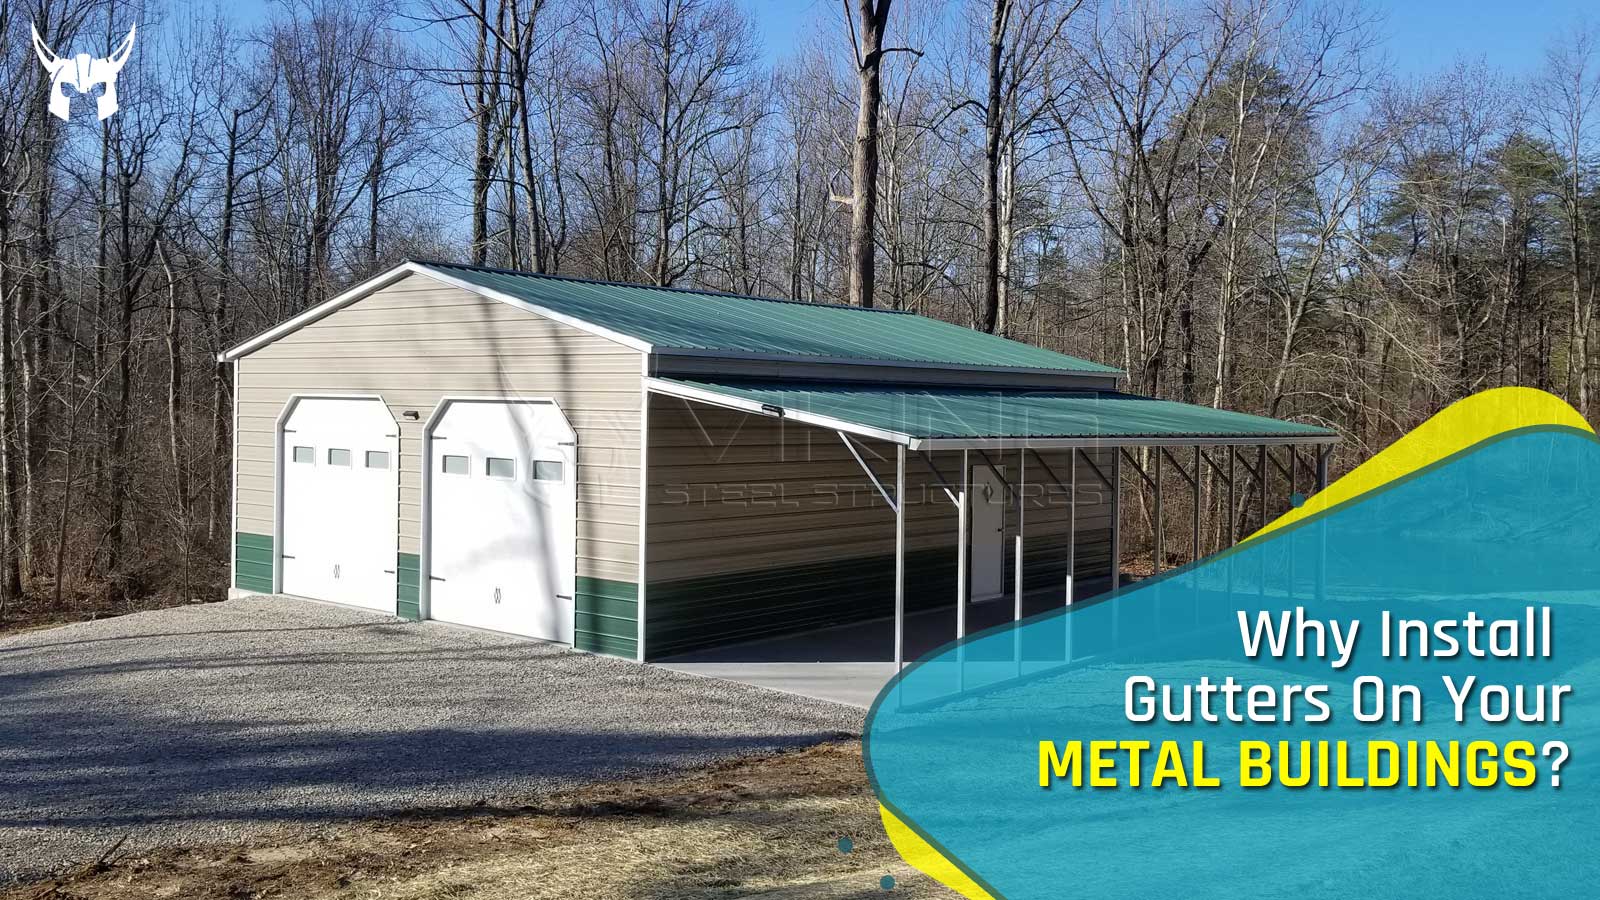 Why Install Gutters On Your Metal Buildings? - Why Install Gutters On Your Metal BuilDings 1